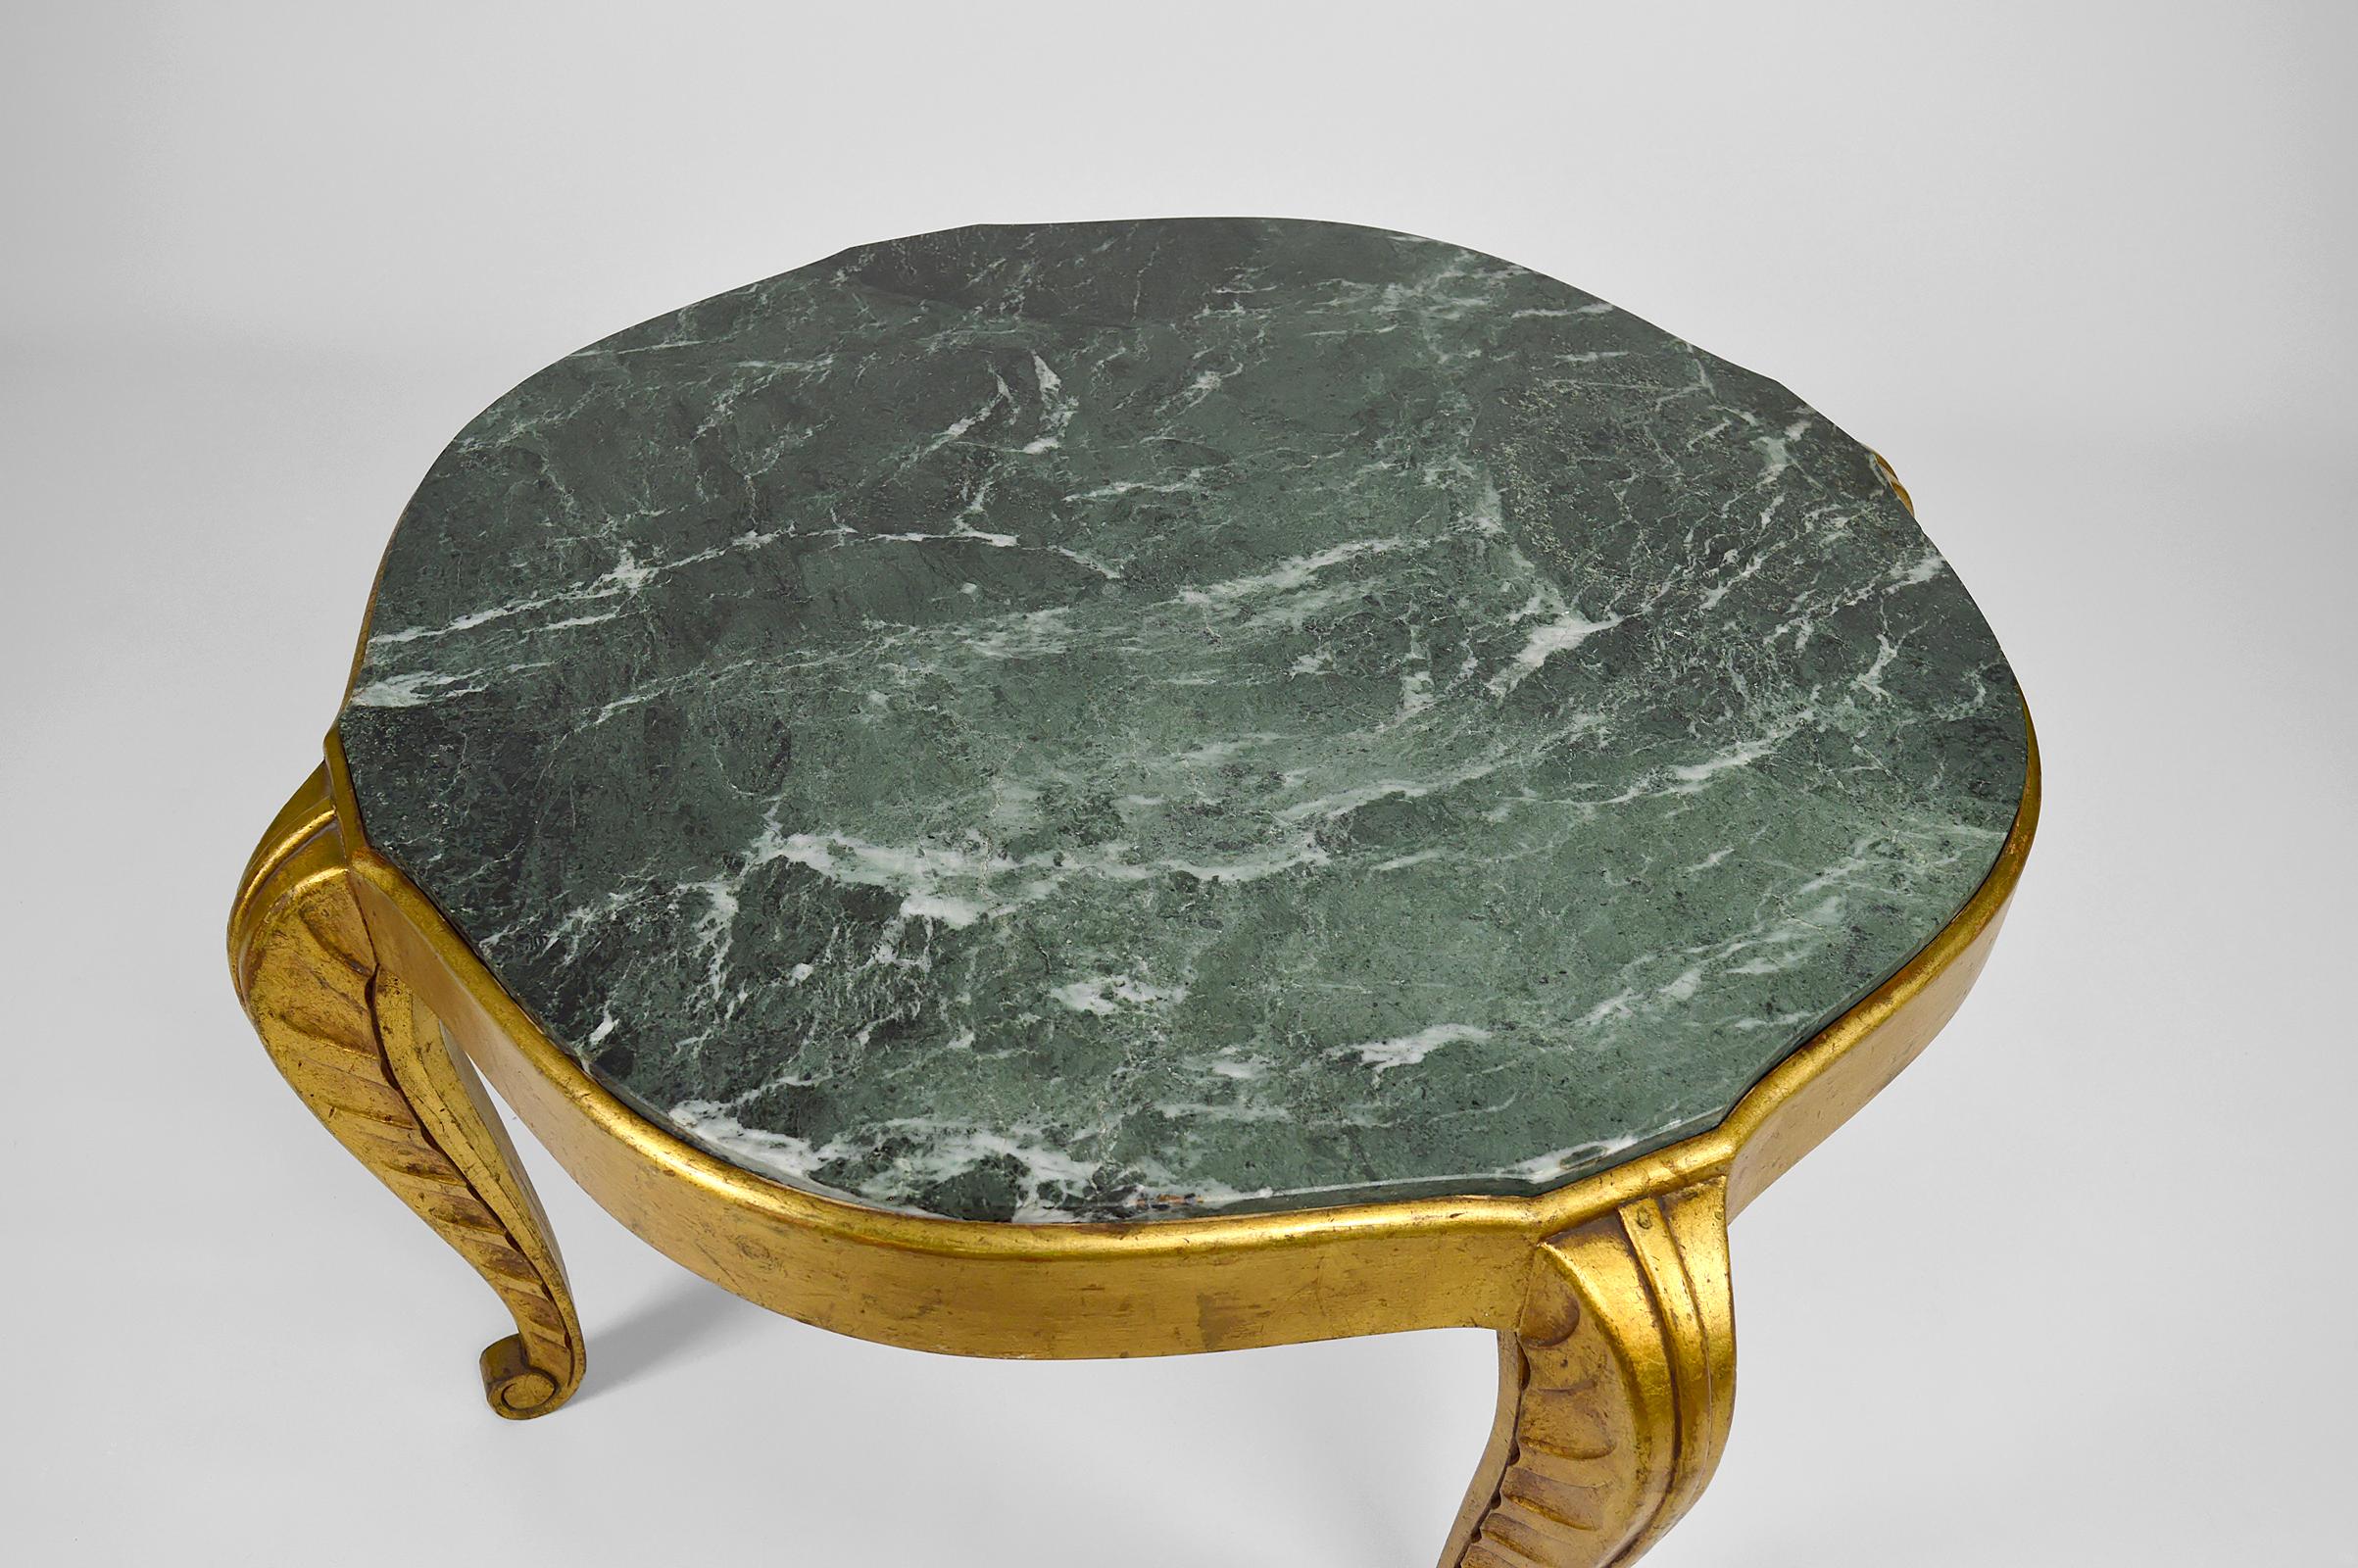 Gilded Side Table with Marble Top by Maison Jansen, Neoclassical Art Deco, 1940s For Sale 4